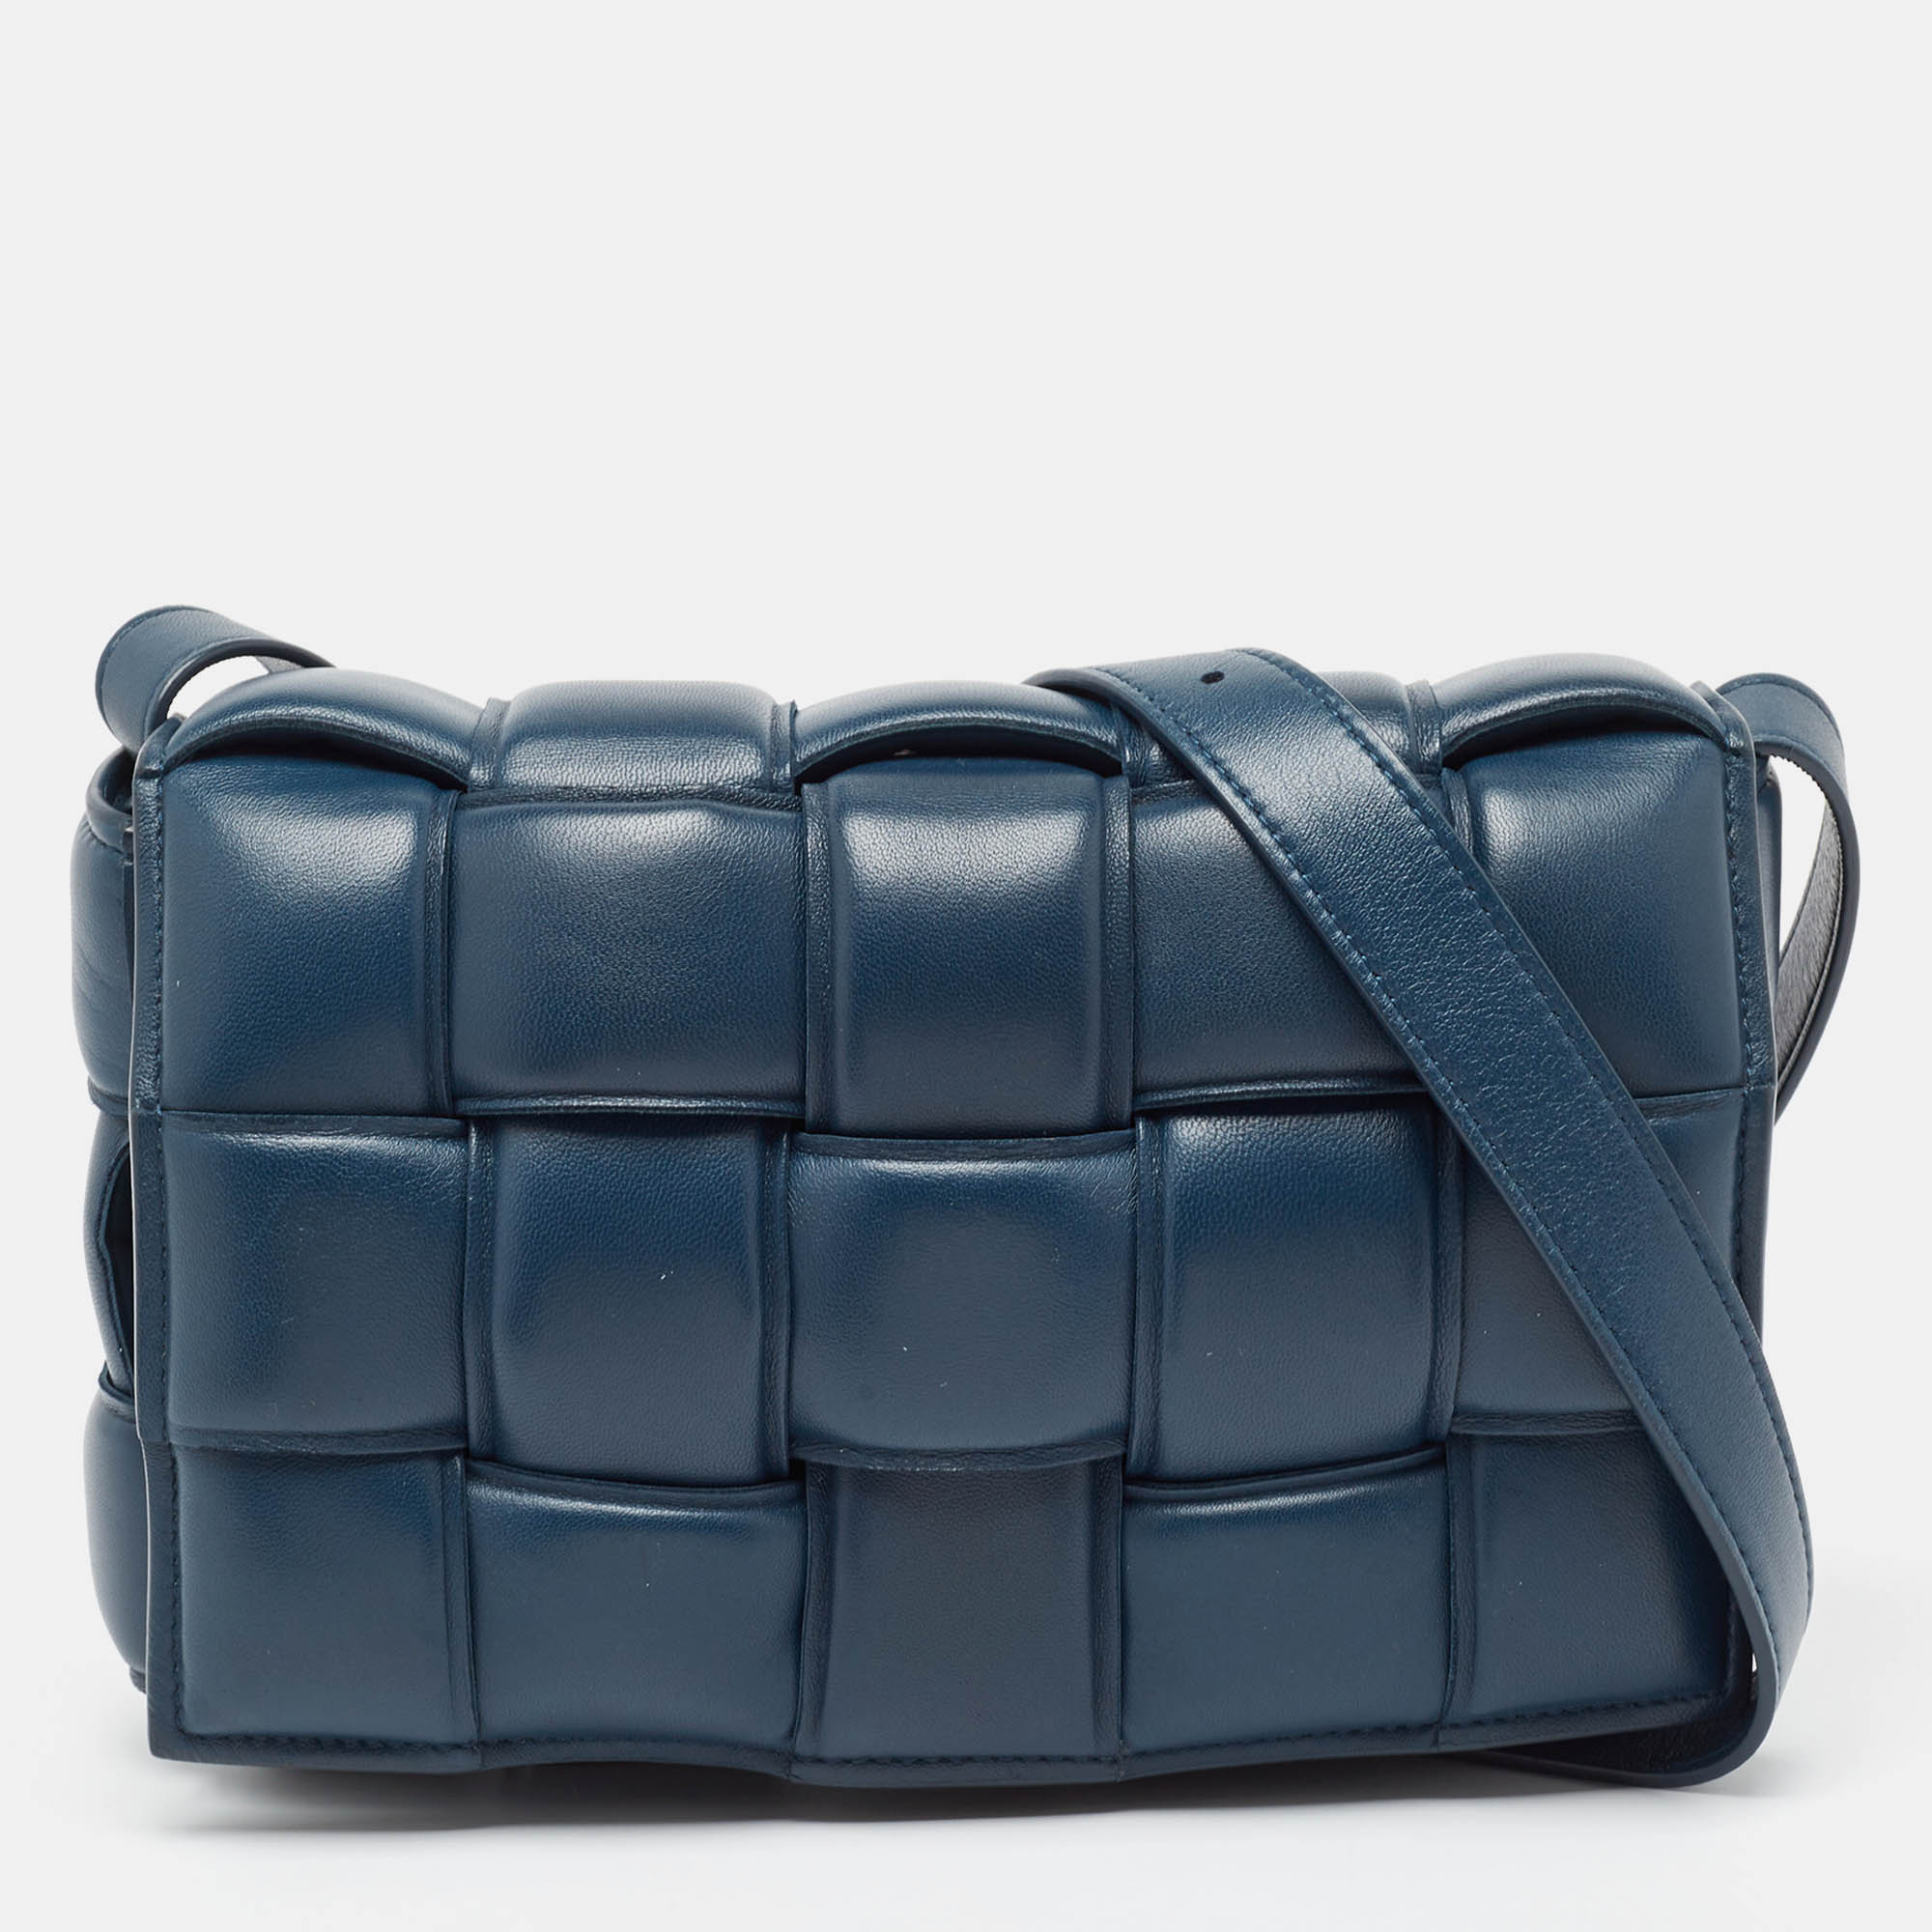 The current bag on many fashionistas minds is this Cassette bag from the house of Bottega Veneta. We have here the one in navy blue leather flaunting a padded maxi weave and a shoulder strap. The insides are sized to fit your essentials that you cannot do without. Do not think twice and make this yours today